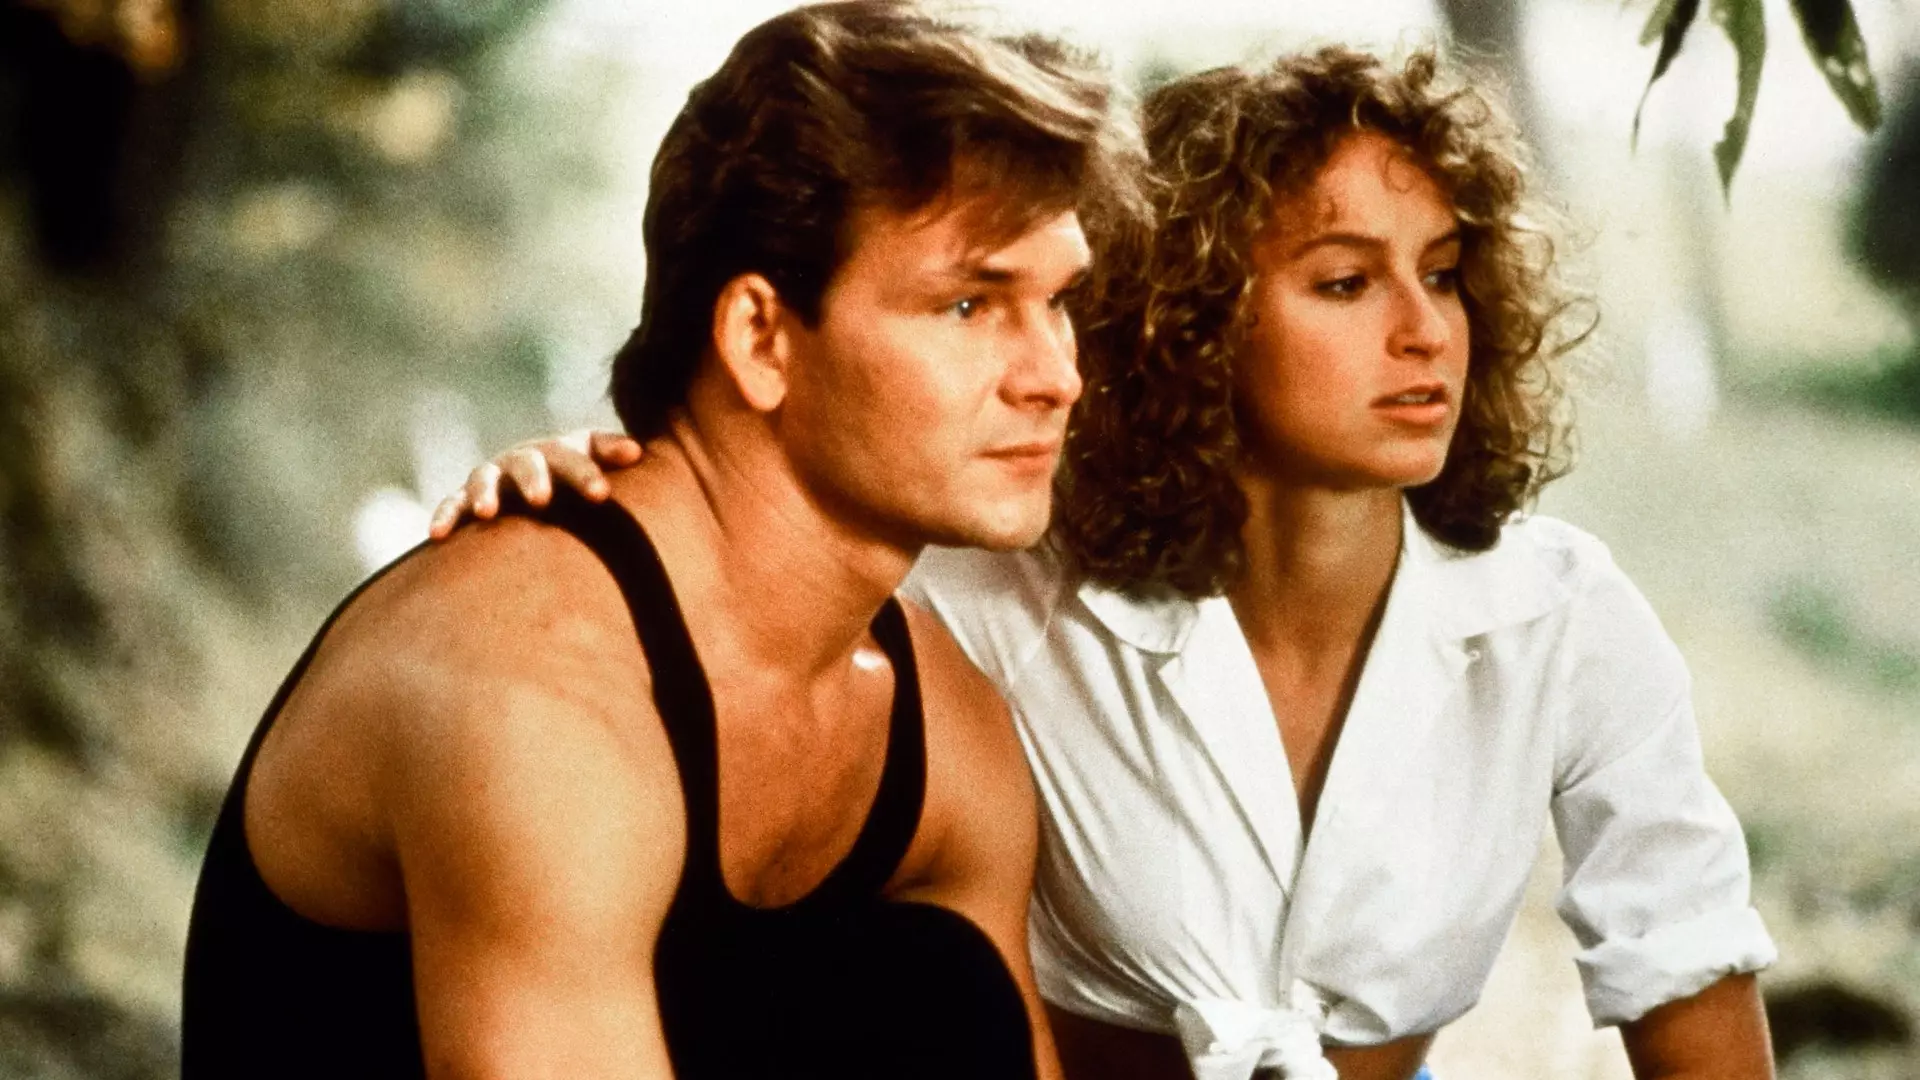 Jennifer Grey and Patrick Swayze star in this classic (